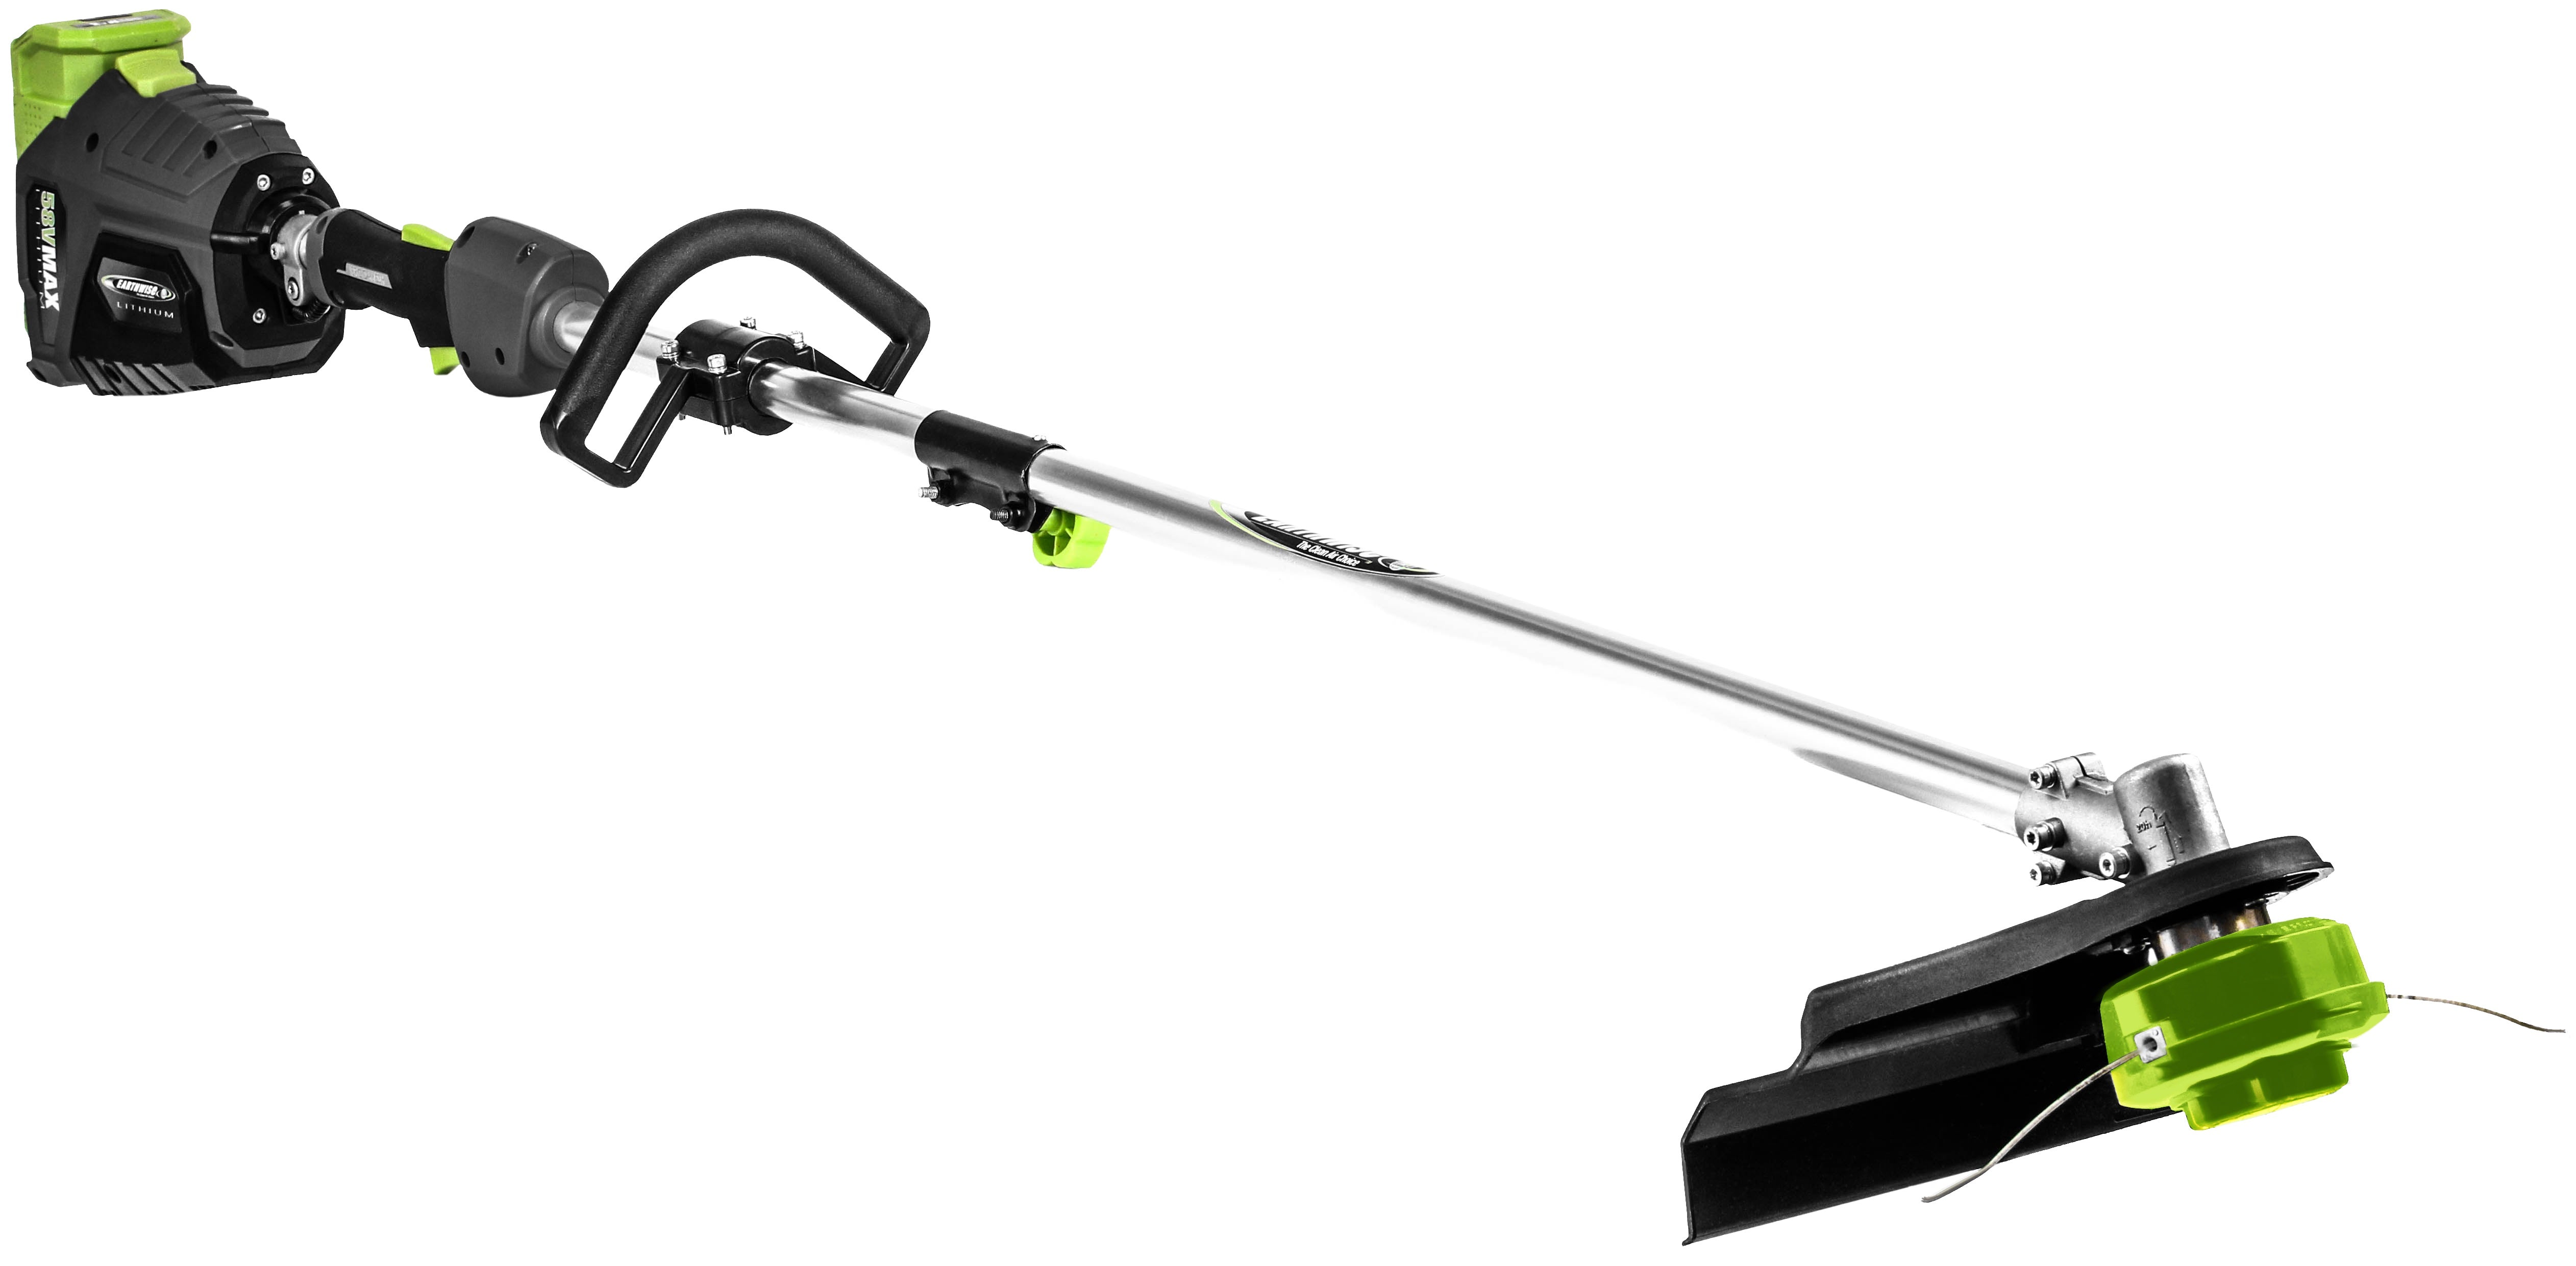 Earthwise Power Tools by ALM 15" 58V 2Ah Lithium String Trimmer